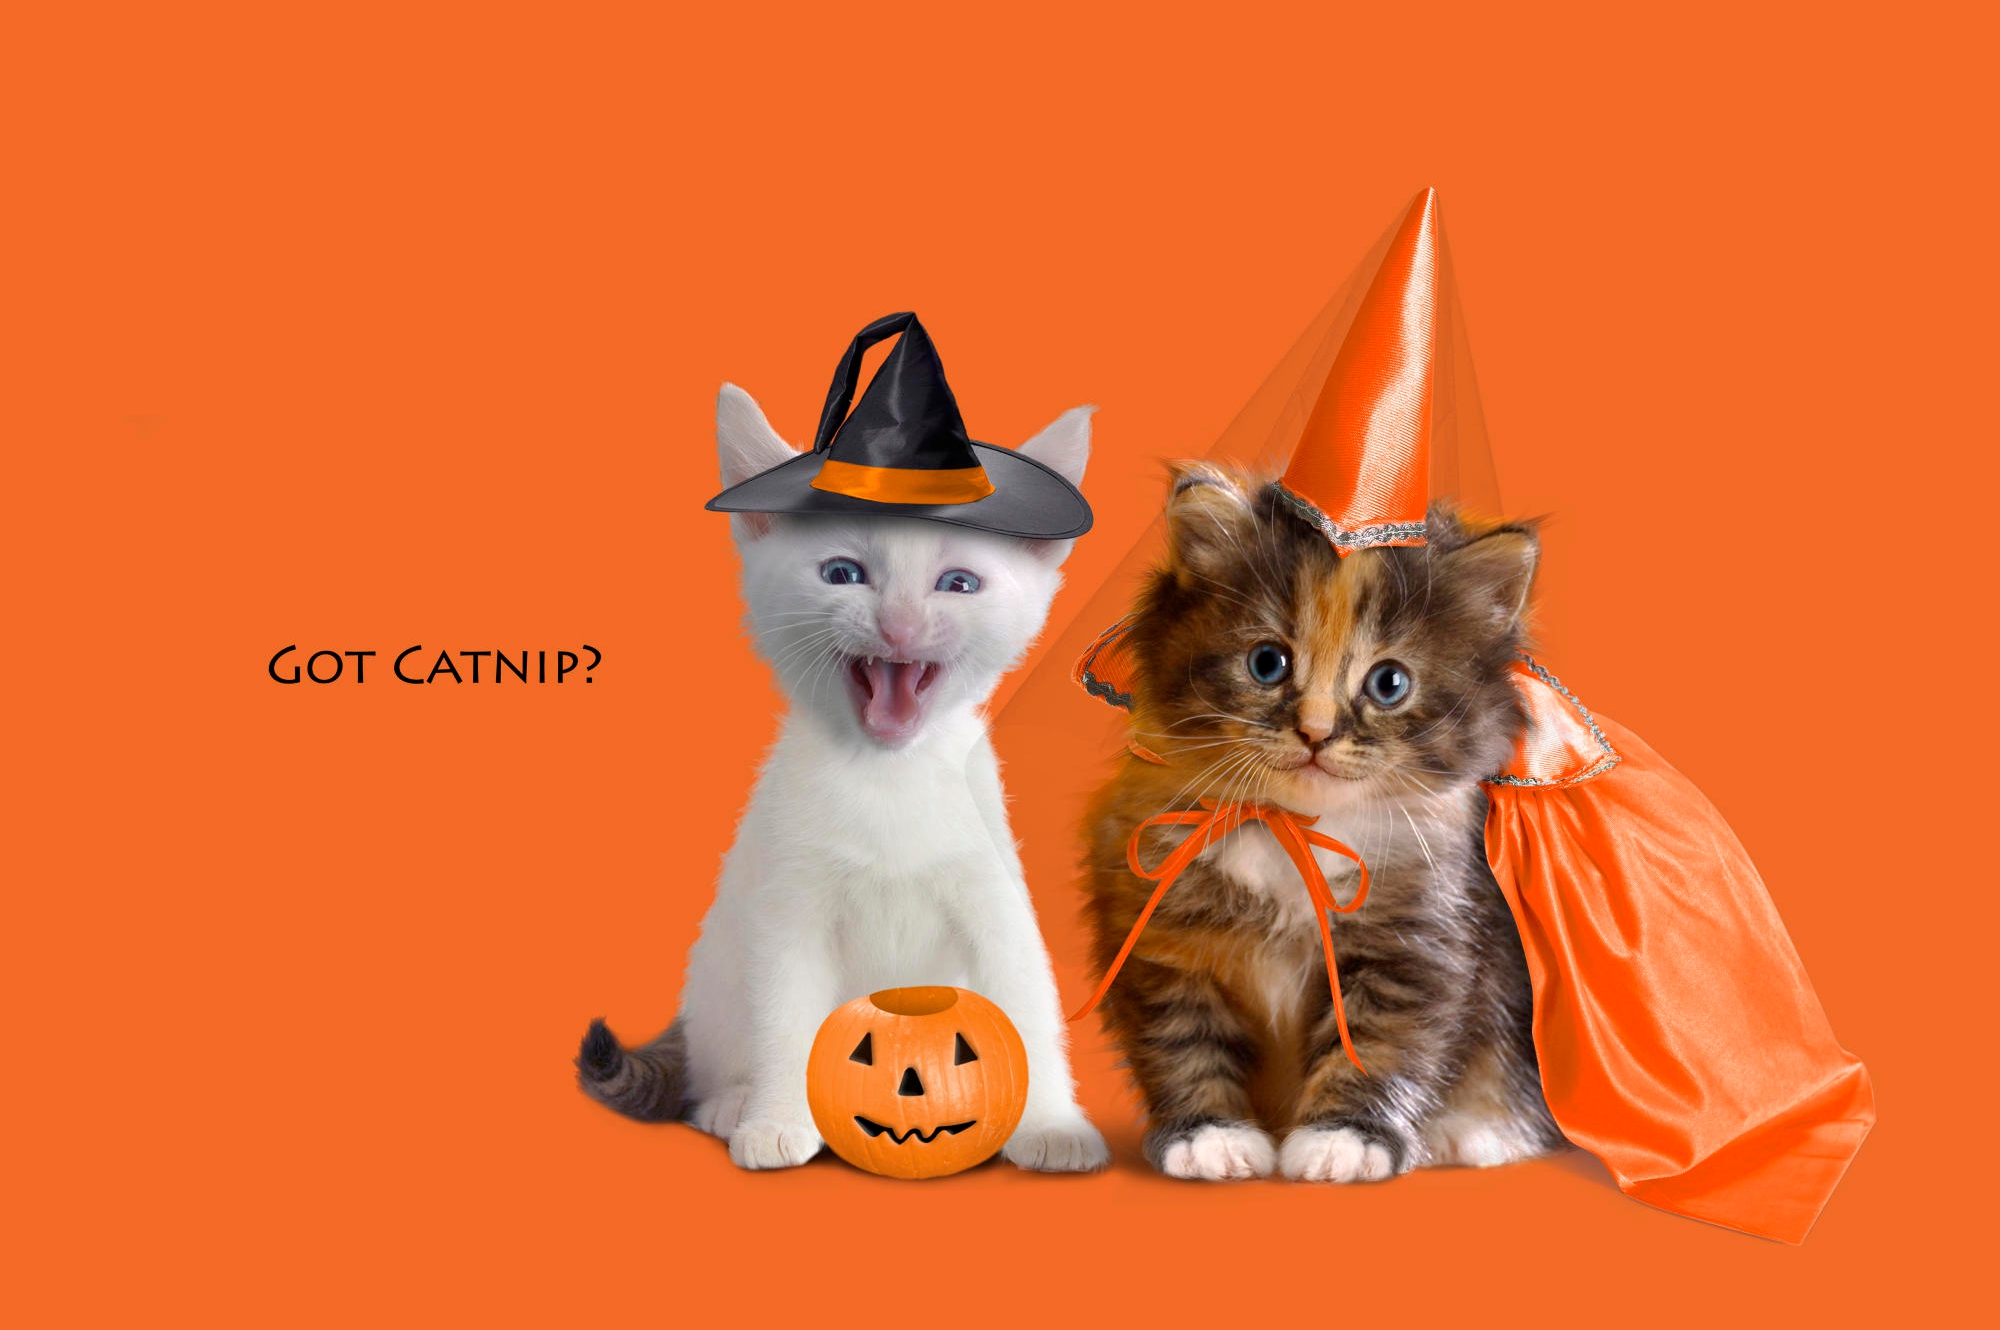 Kittens dressed up for Halloween funny picsco 2000x1330